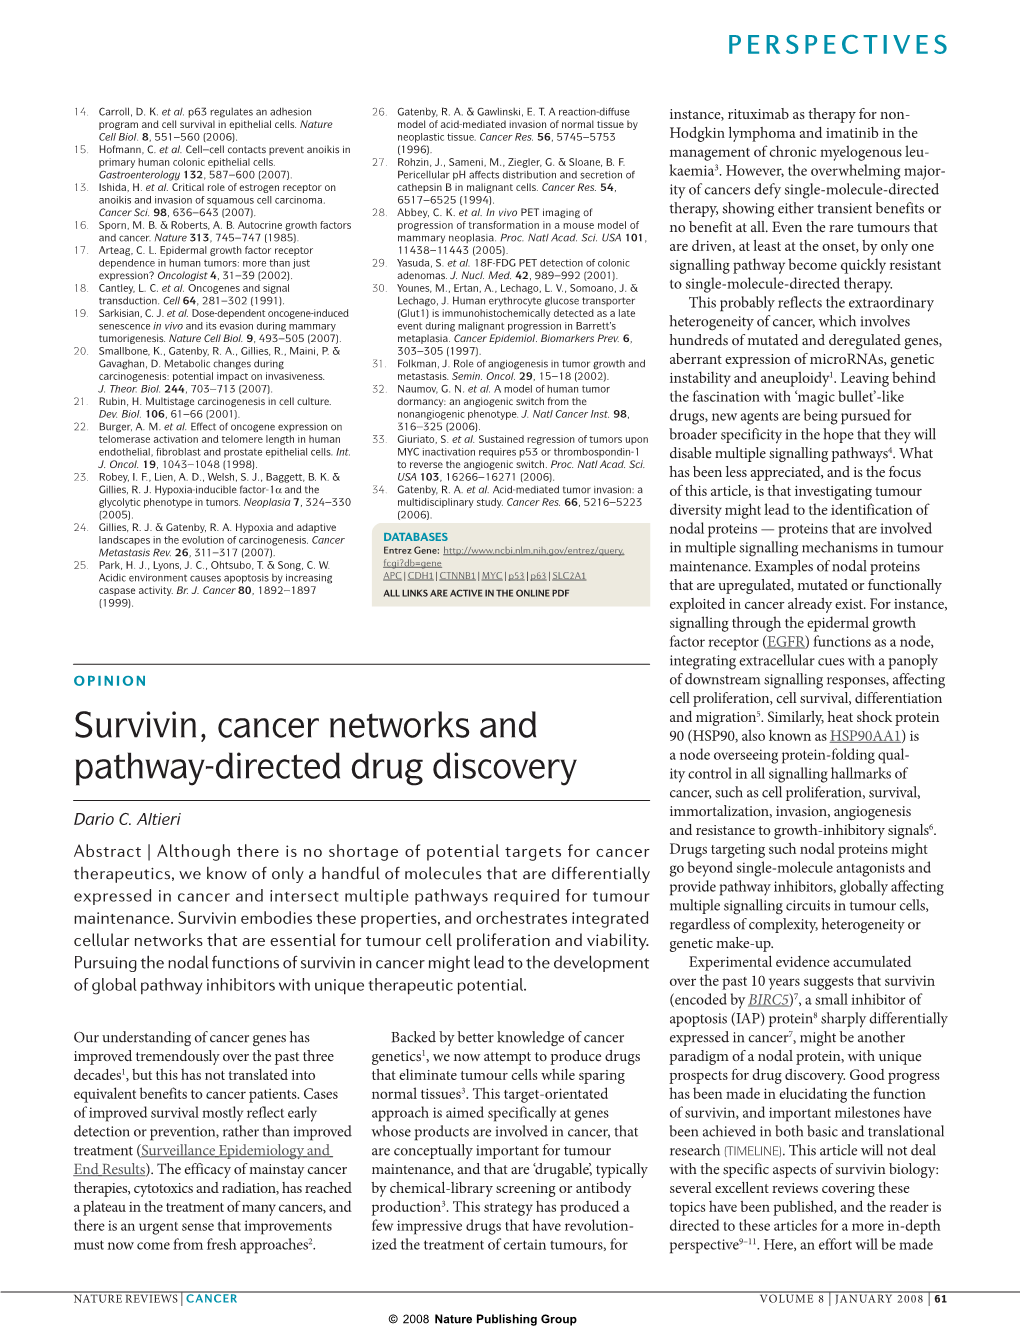 Survivin, Cancer Networks and Pathway-Directed Drug Discovery